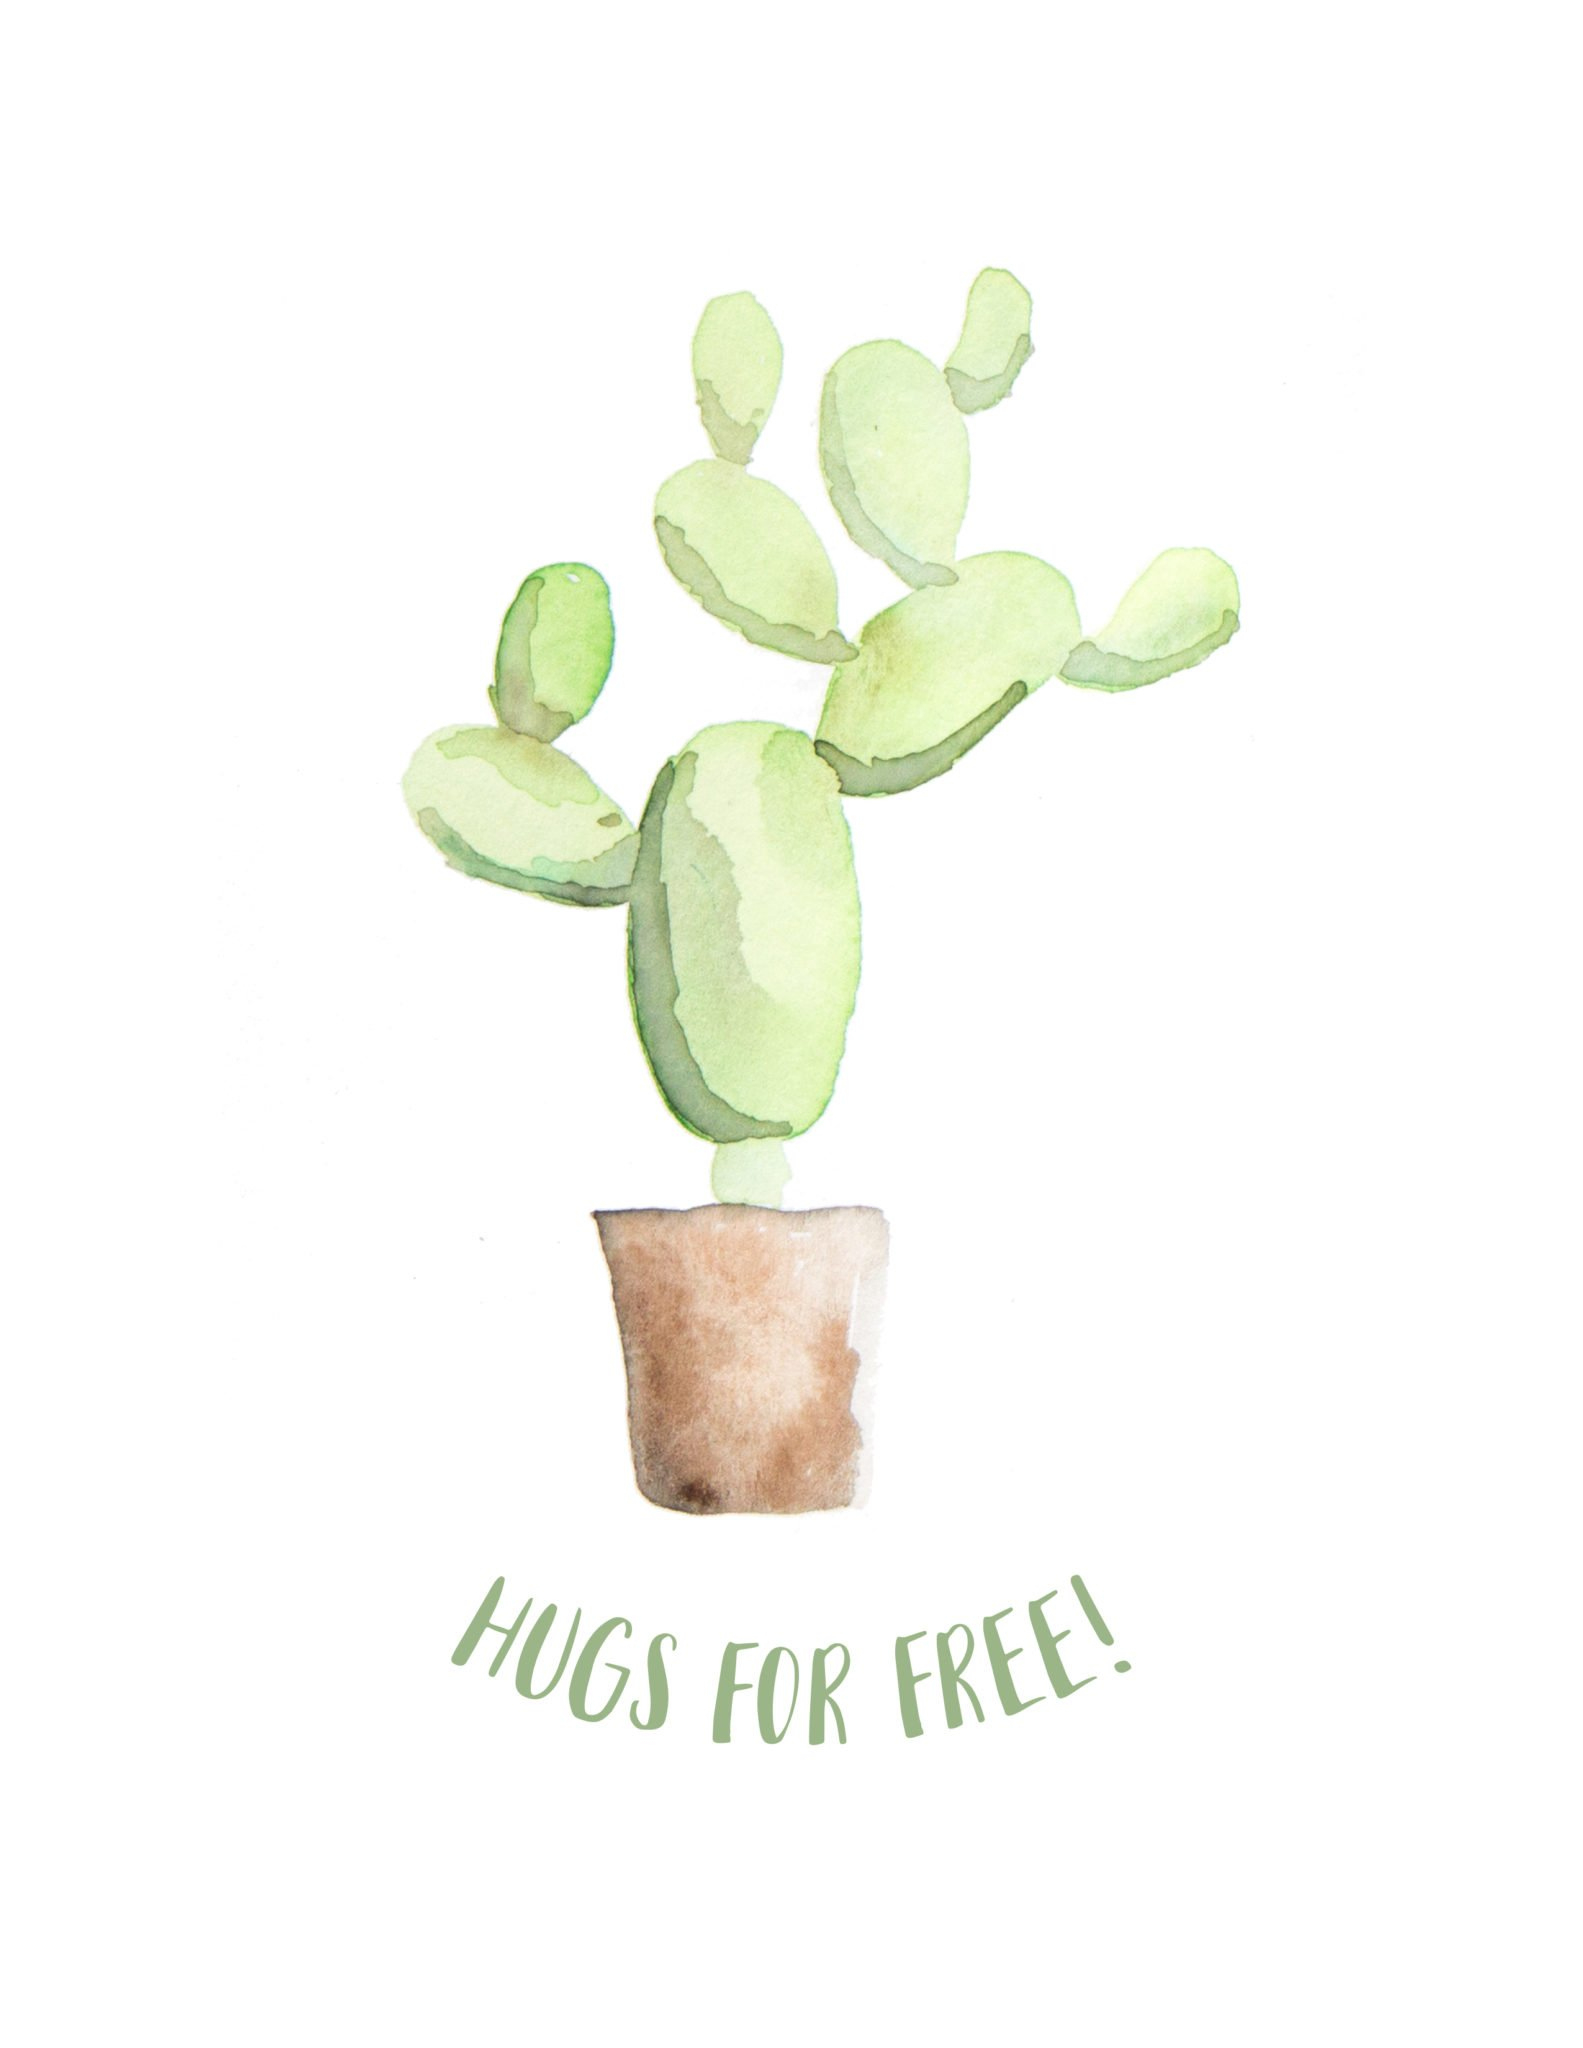 Hugs For Free! Cactus Wall Art Printable – Sustain My Craft Habit with Free Printable Cactus